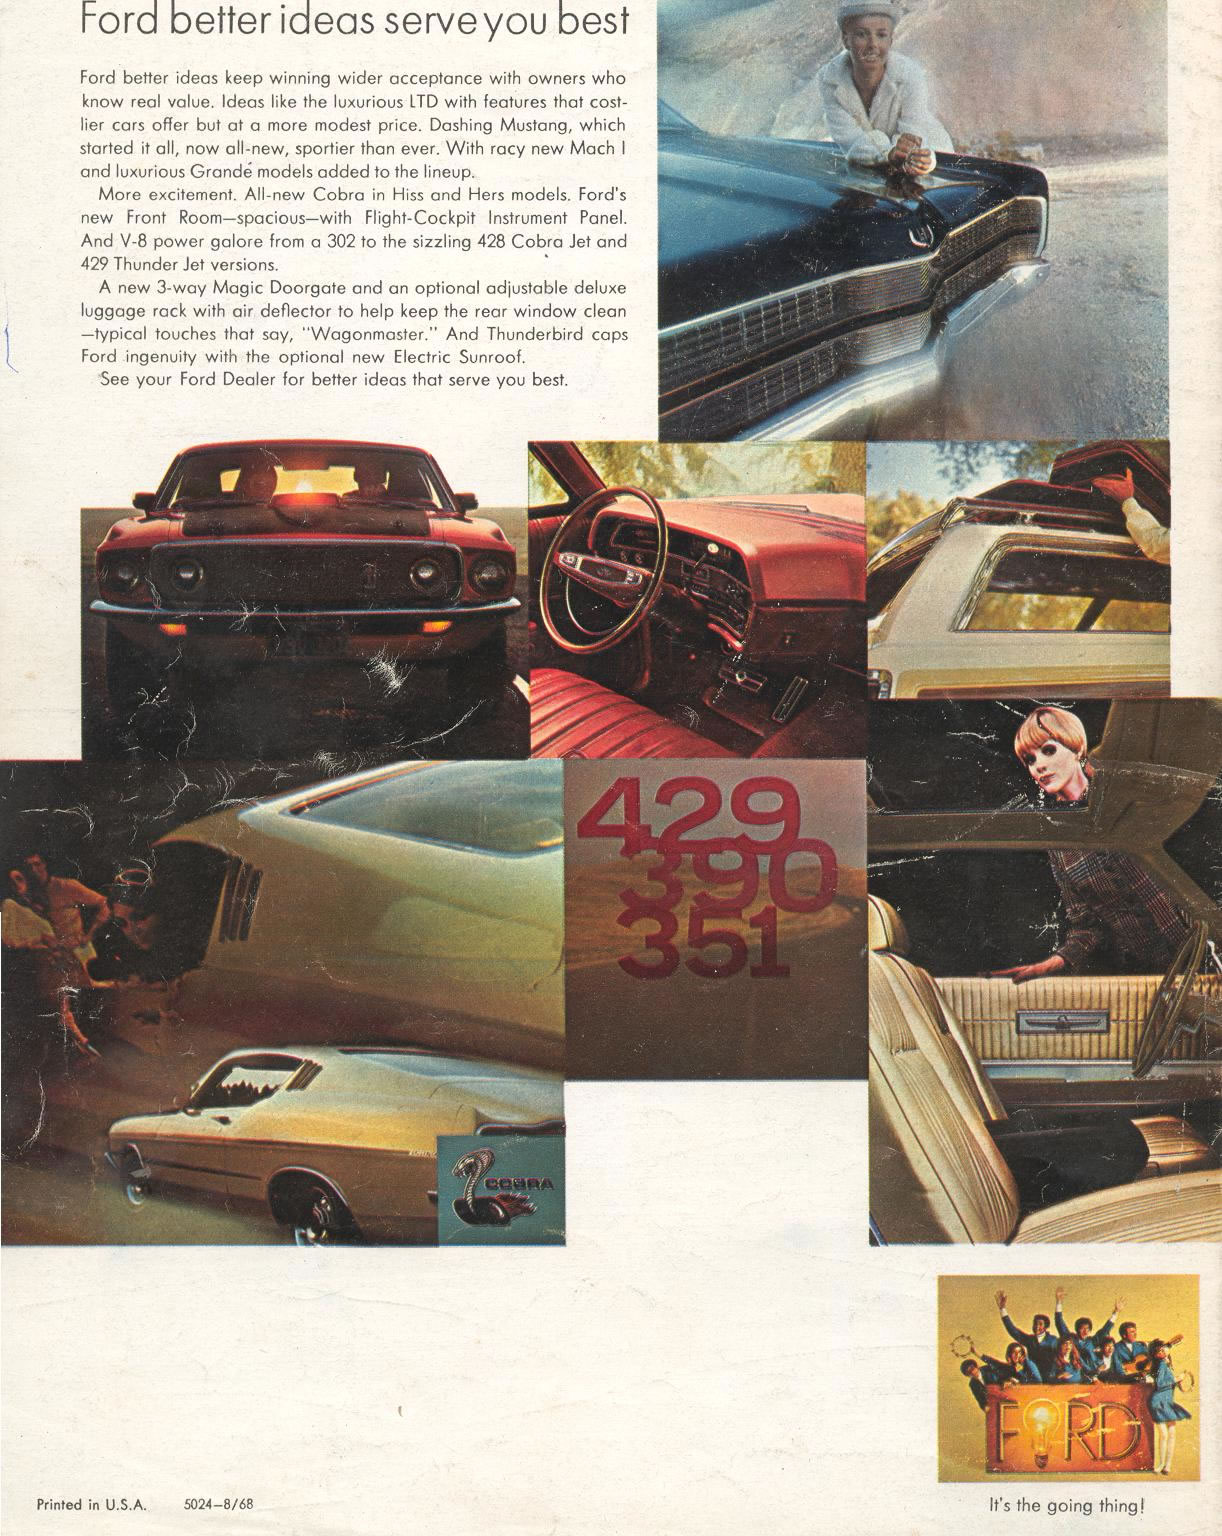 1969 Ford Buyers Digest-16